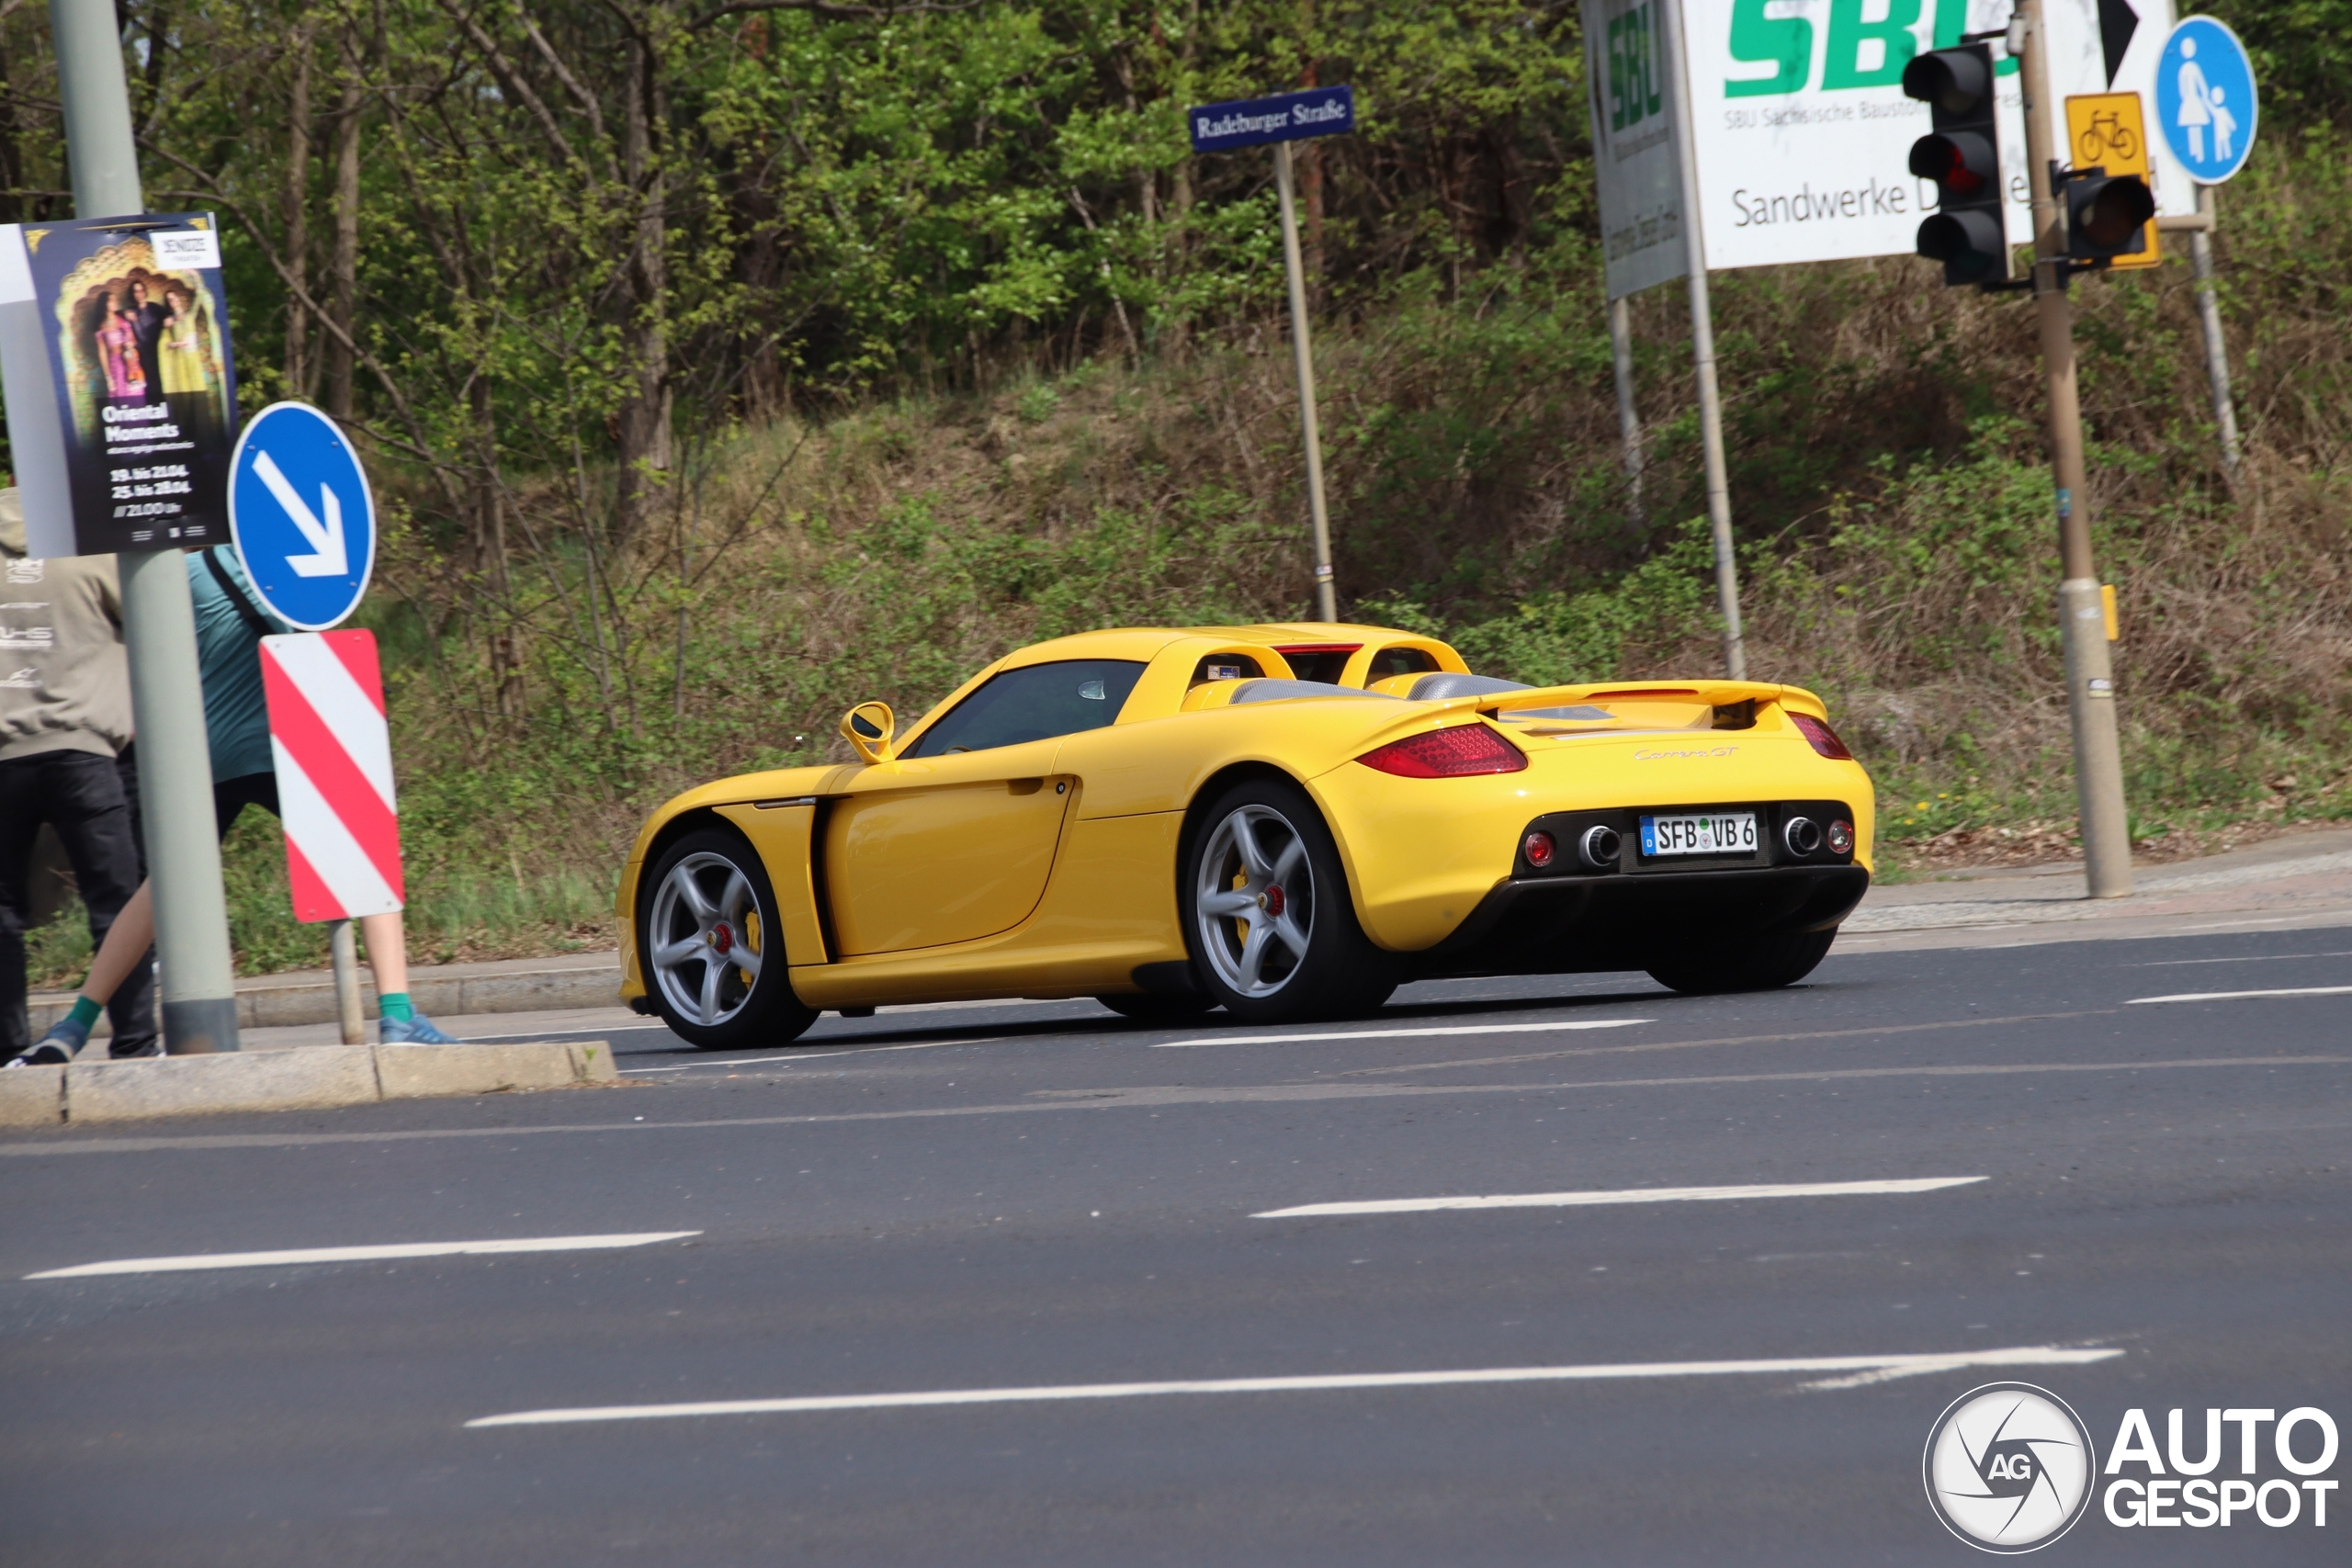 A yellow Carrera GT shows up in Dresden.